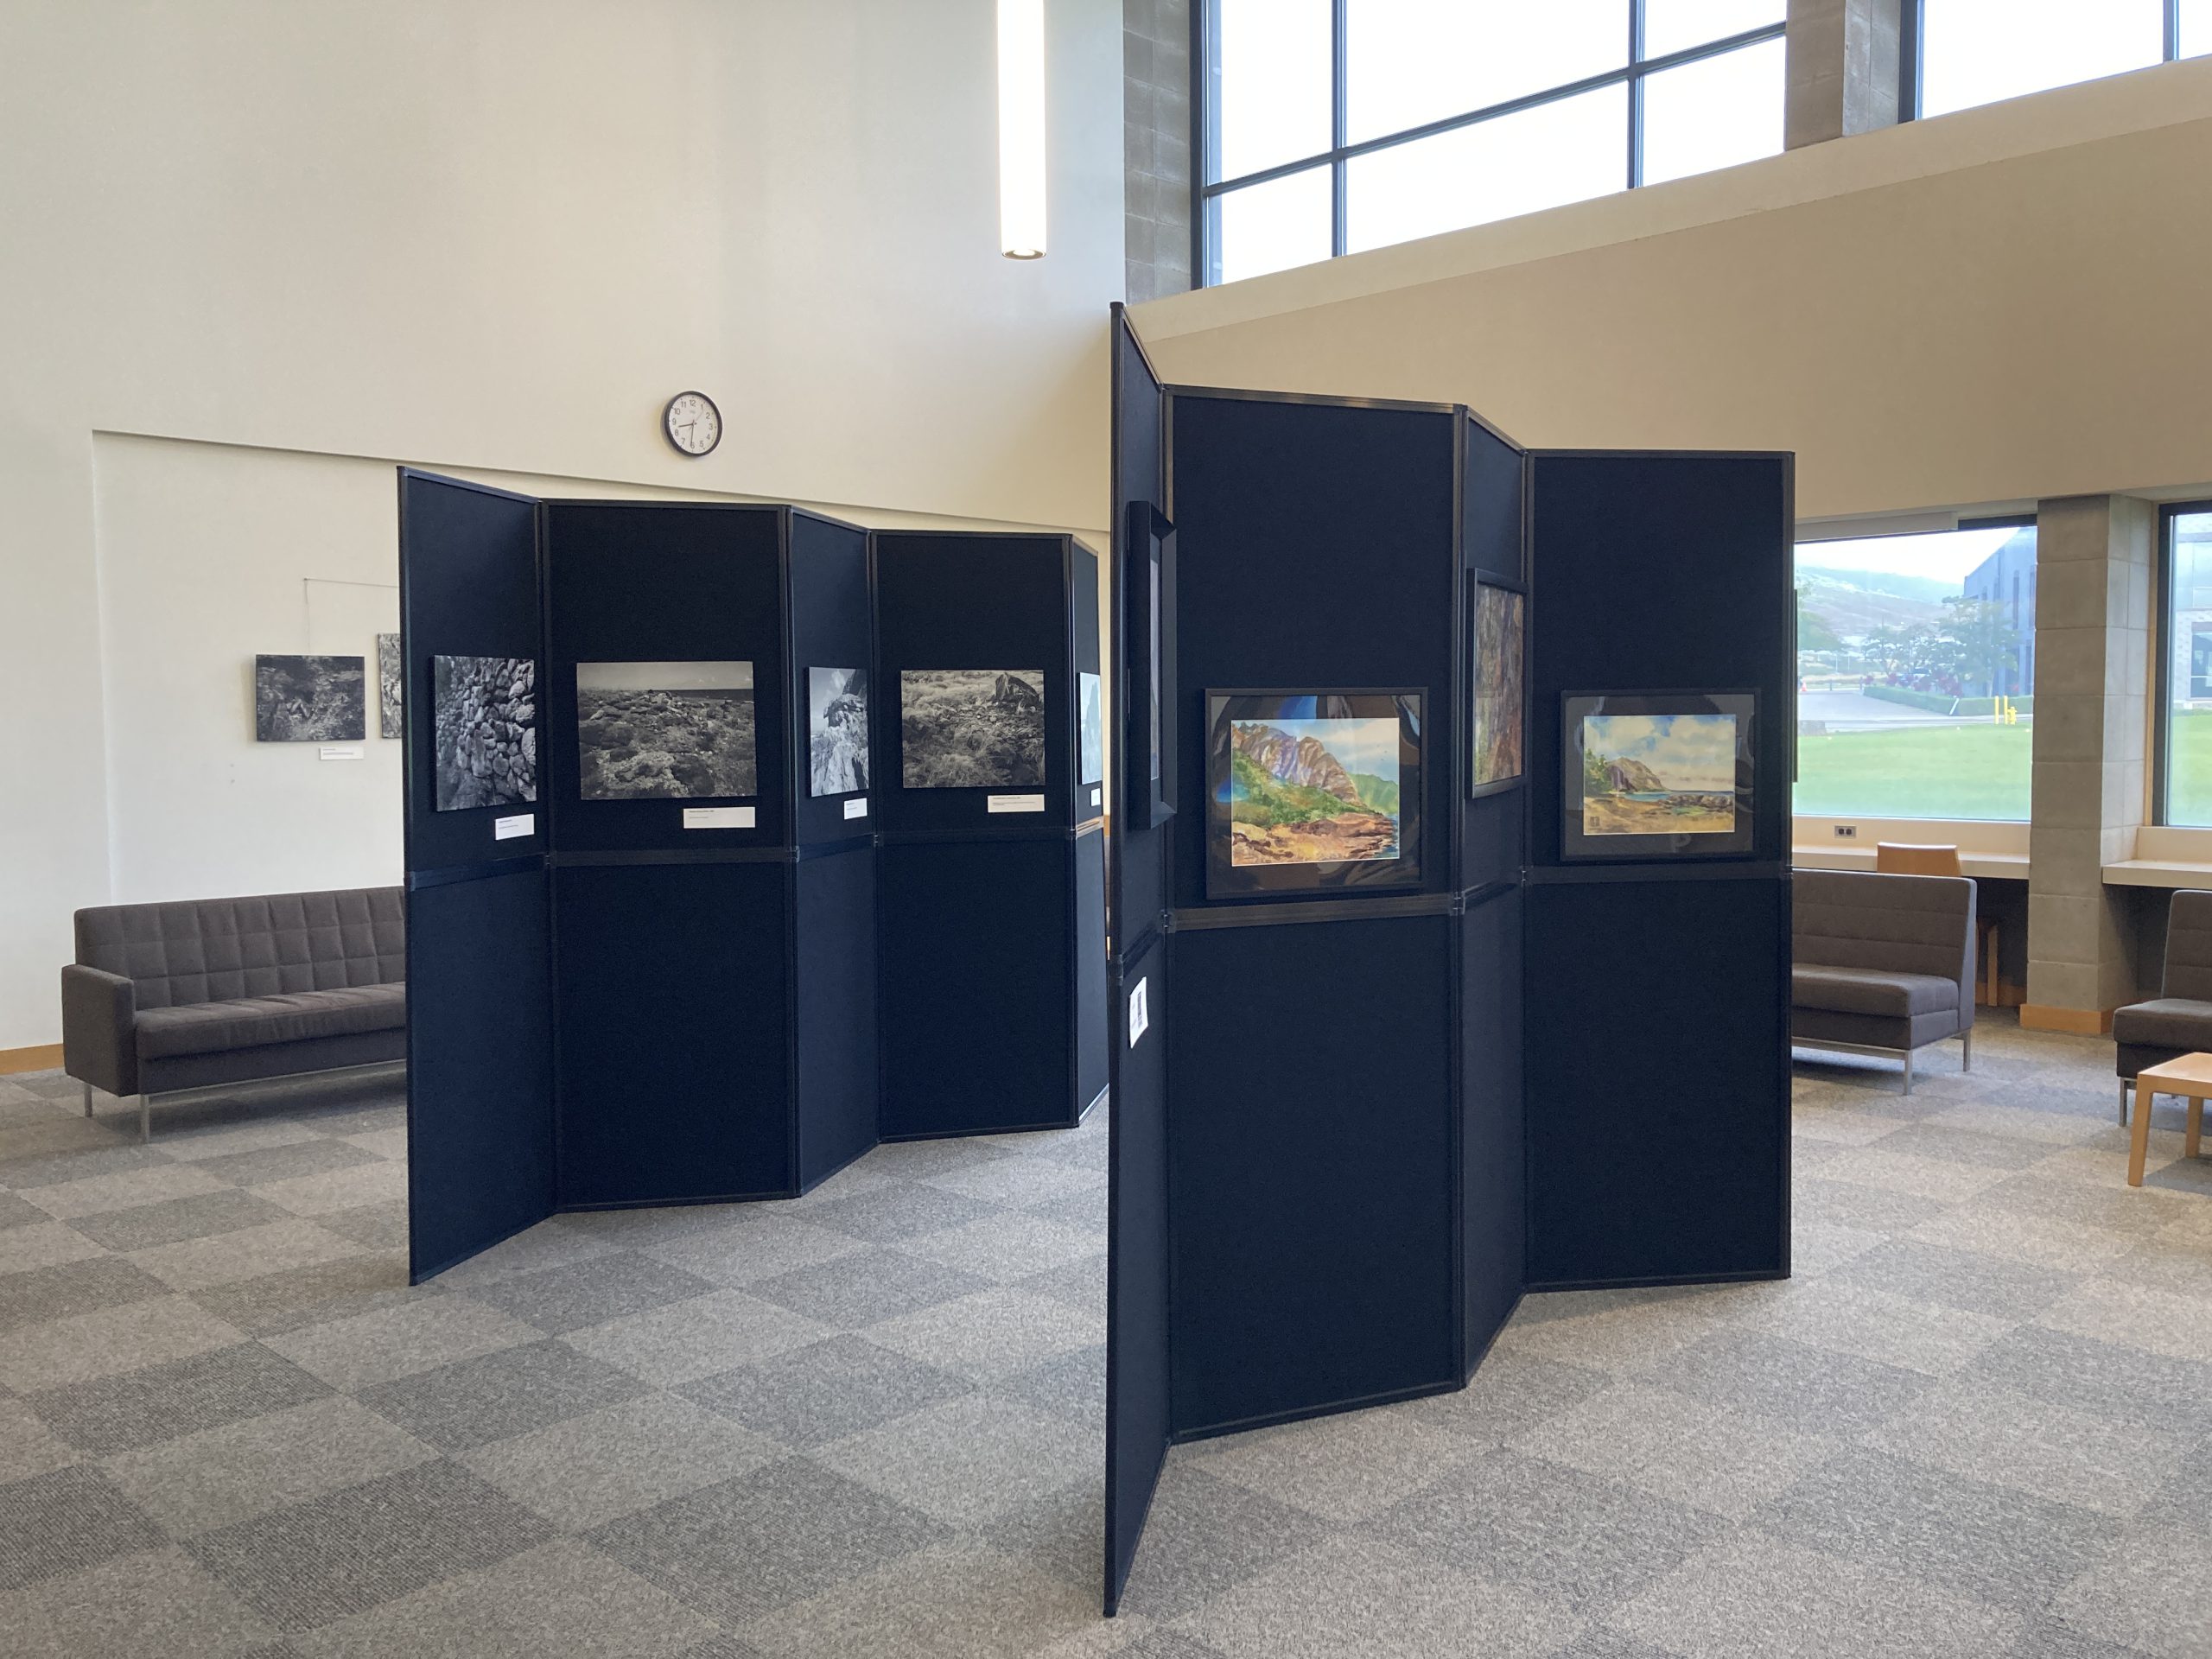 An image of two standing display panel walls that contain several framed pieces of artwork, related to the Kānehūnāmoku Exhibit.